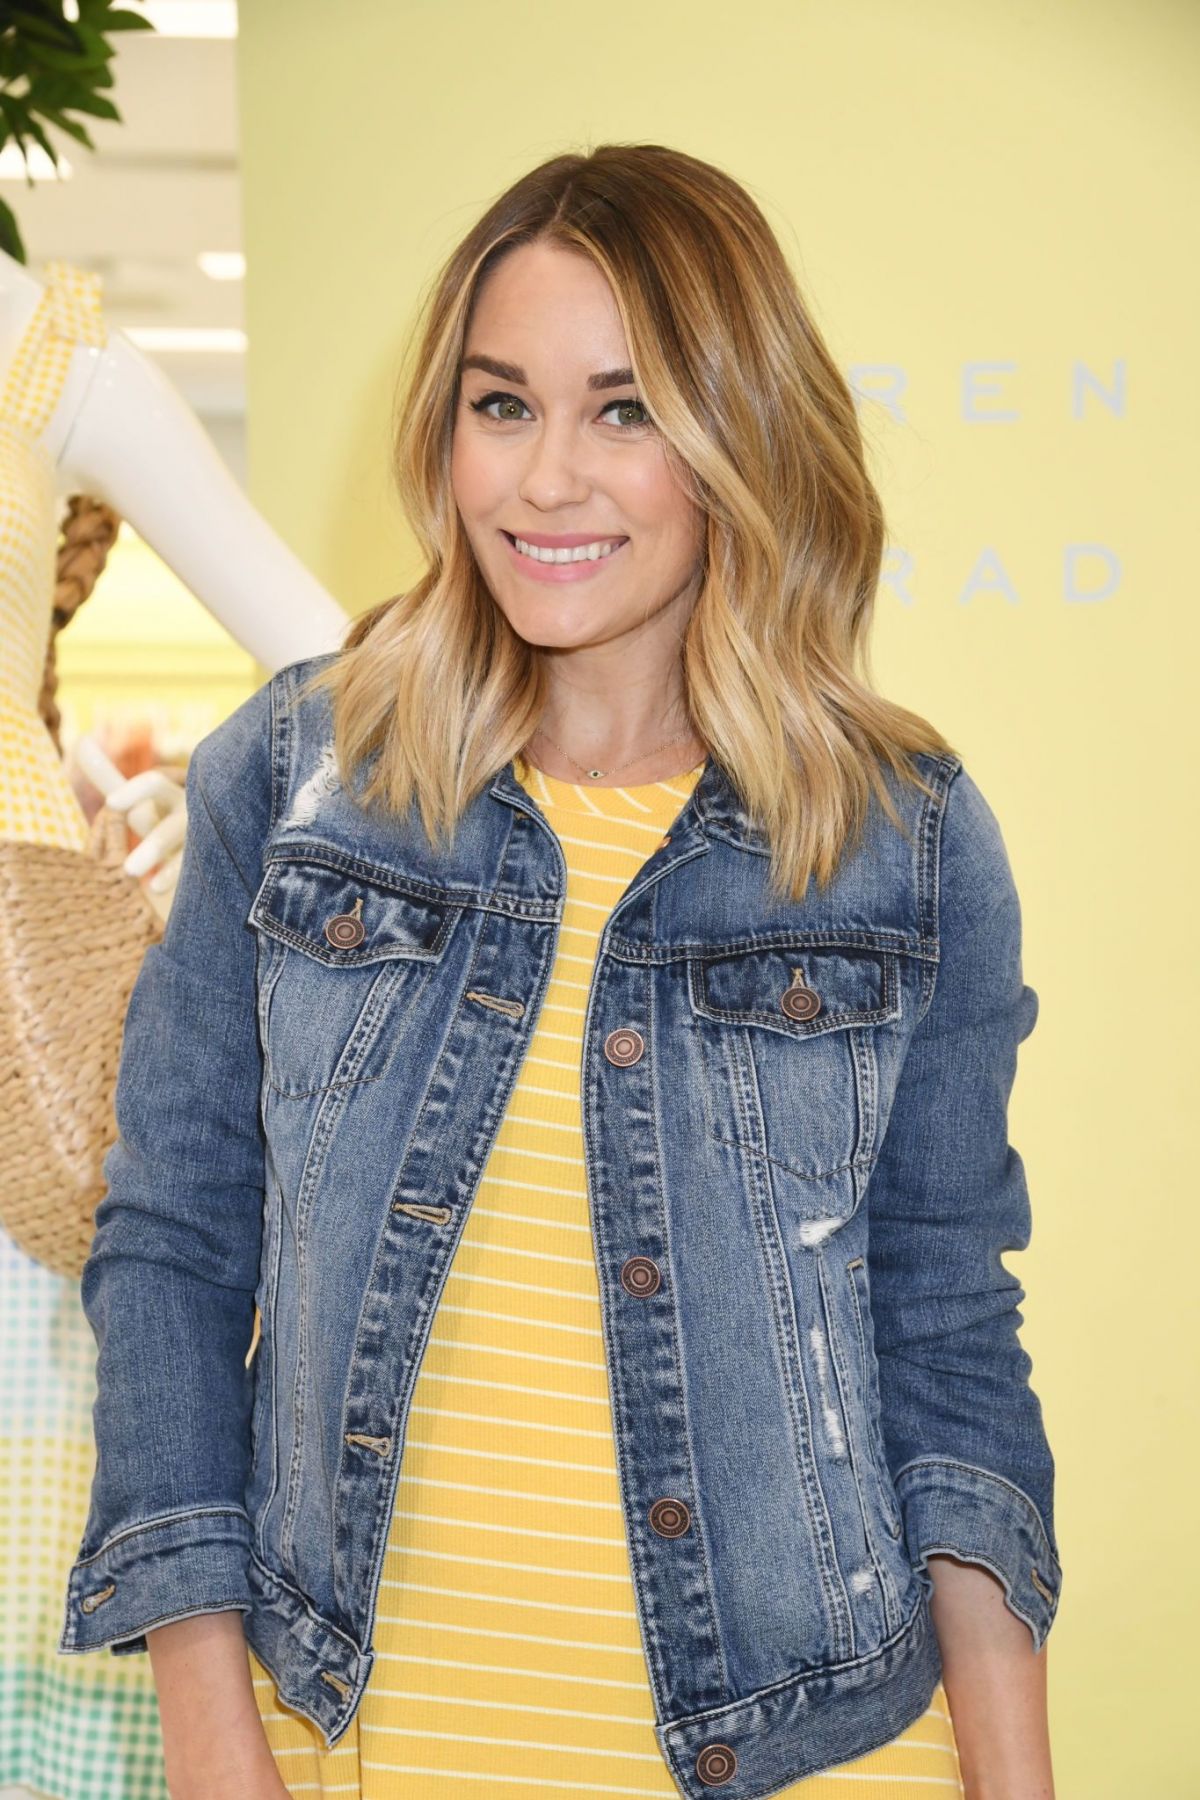 Pregnant Lauren Conrad launches her spring Kohl's collection wearing $60  heels and $37 jean jacket